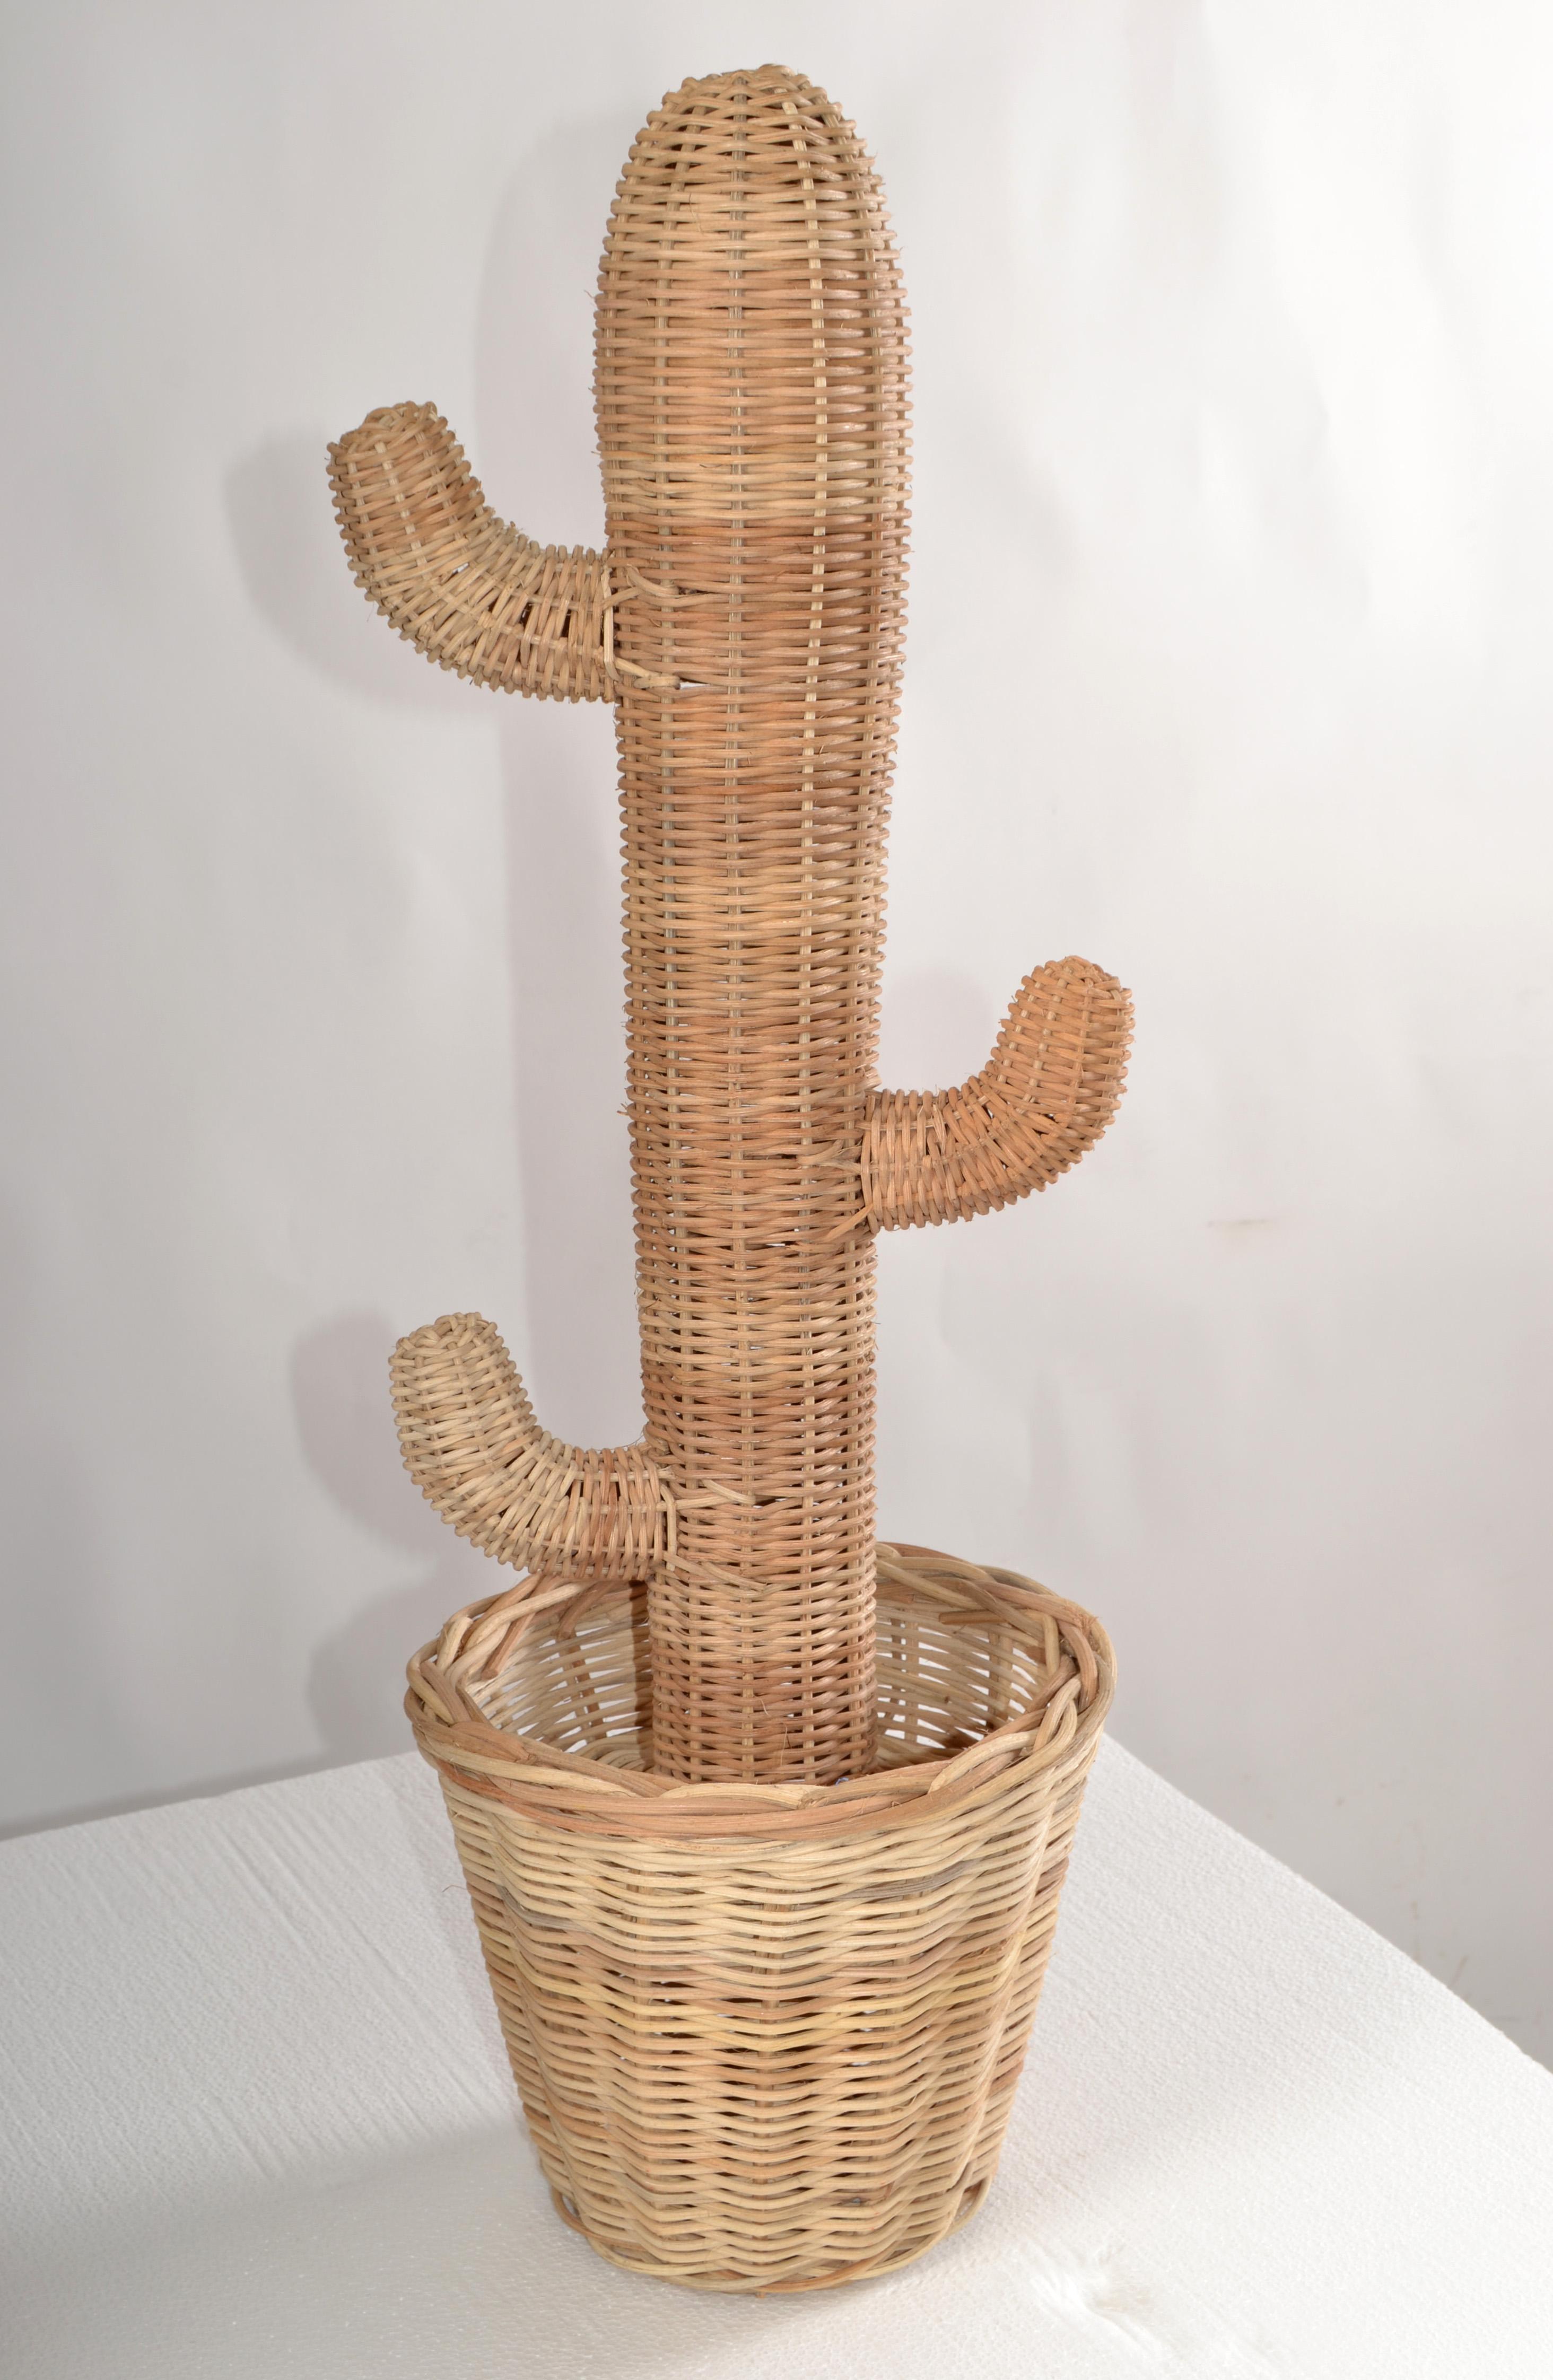 Mario Lopez Torres Style Mid-Century Modern hand-woven Rattan, Wicker and Reed Cactus Pot Sculpture.
Bohemian Style made in America in the late 20th Century.
All original condition with some breaks at the Stem due to age and dryness.